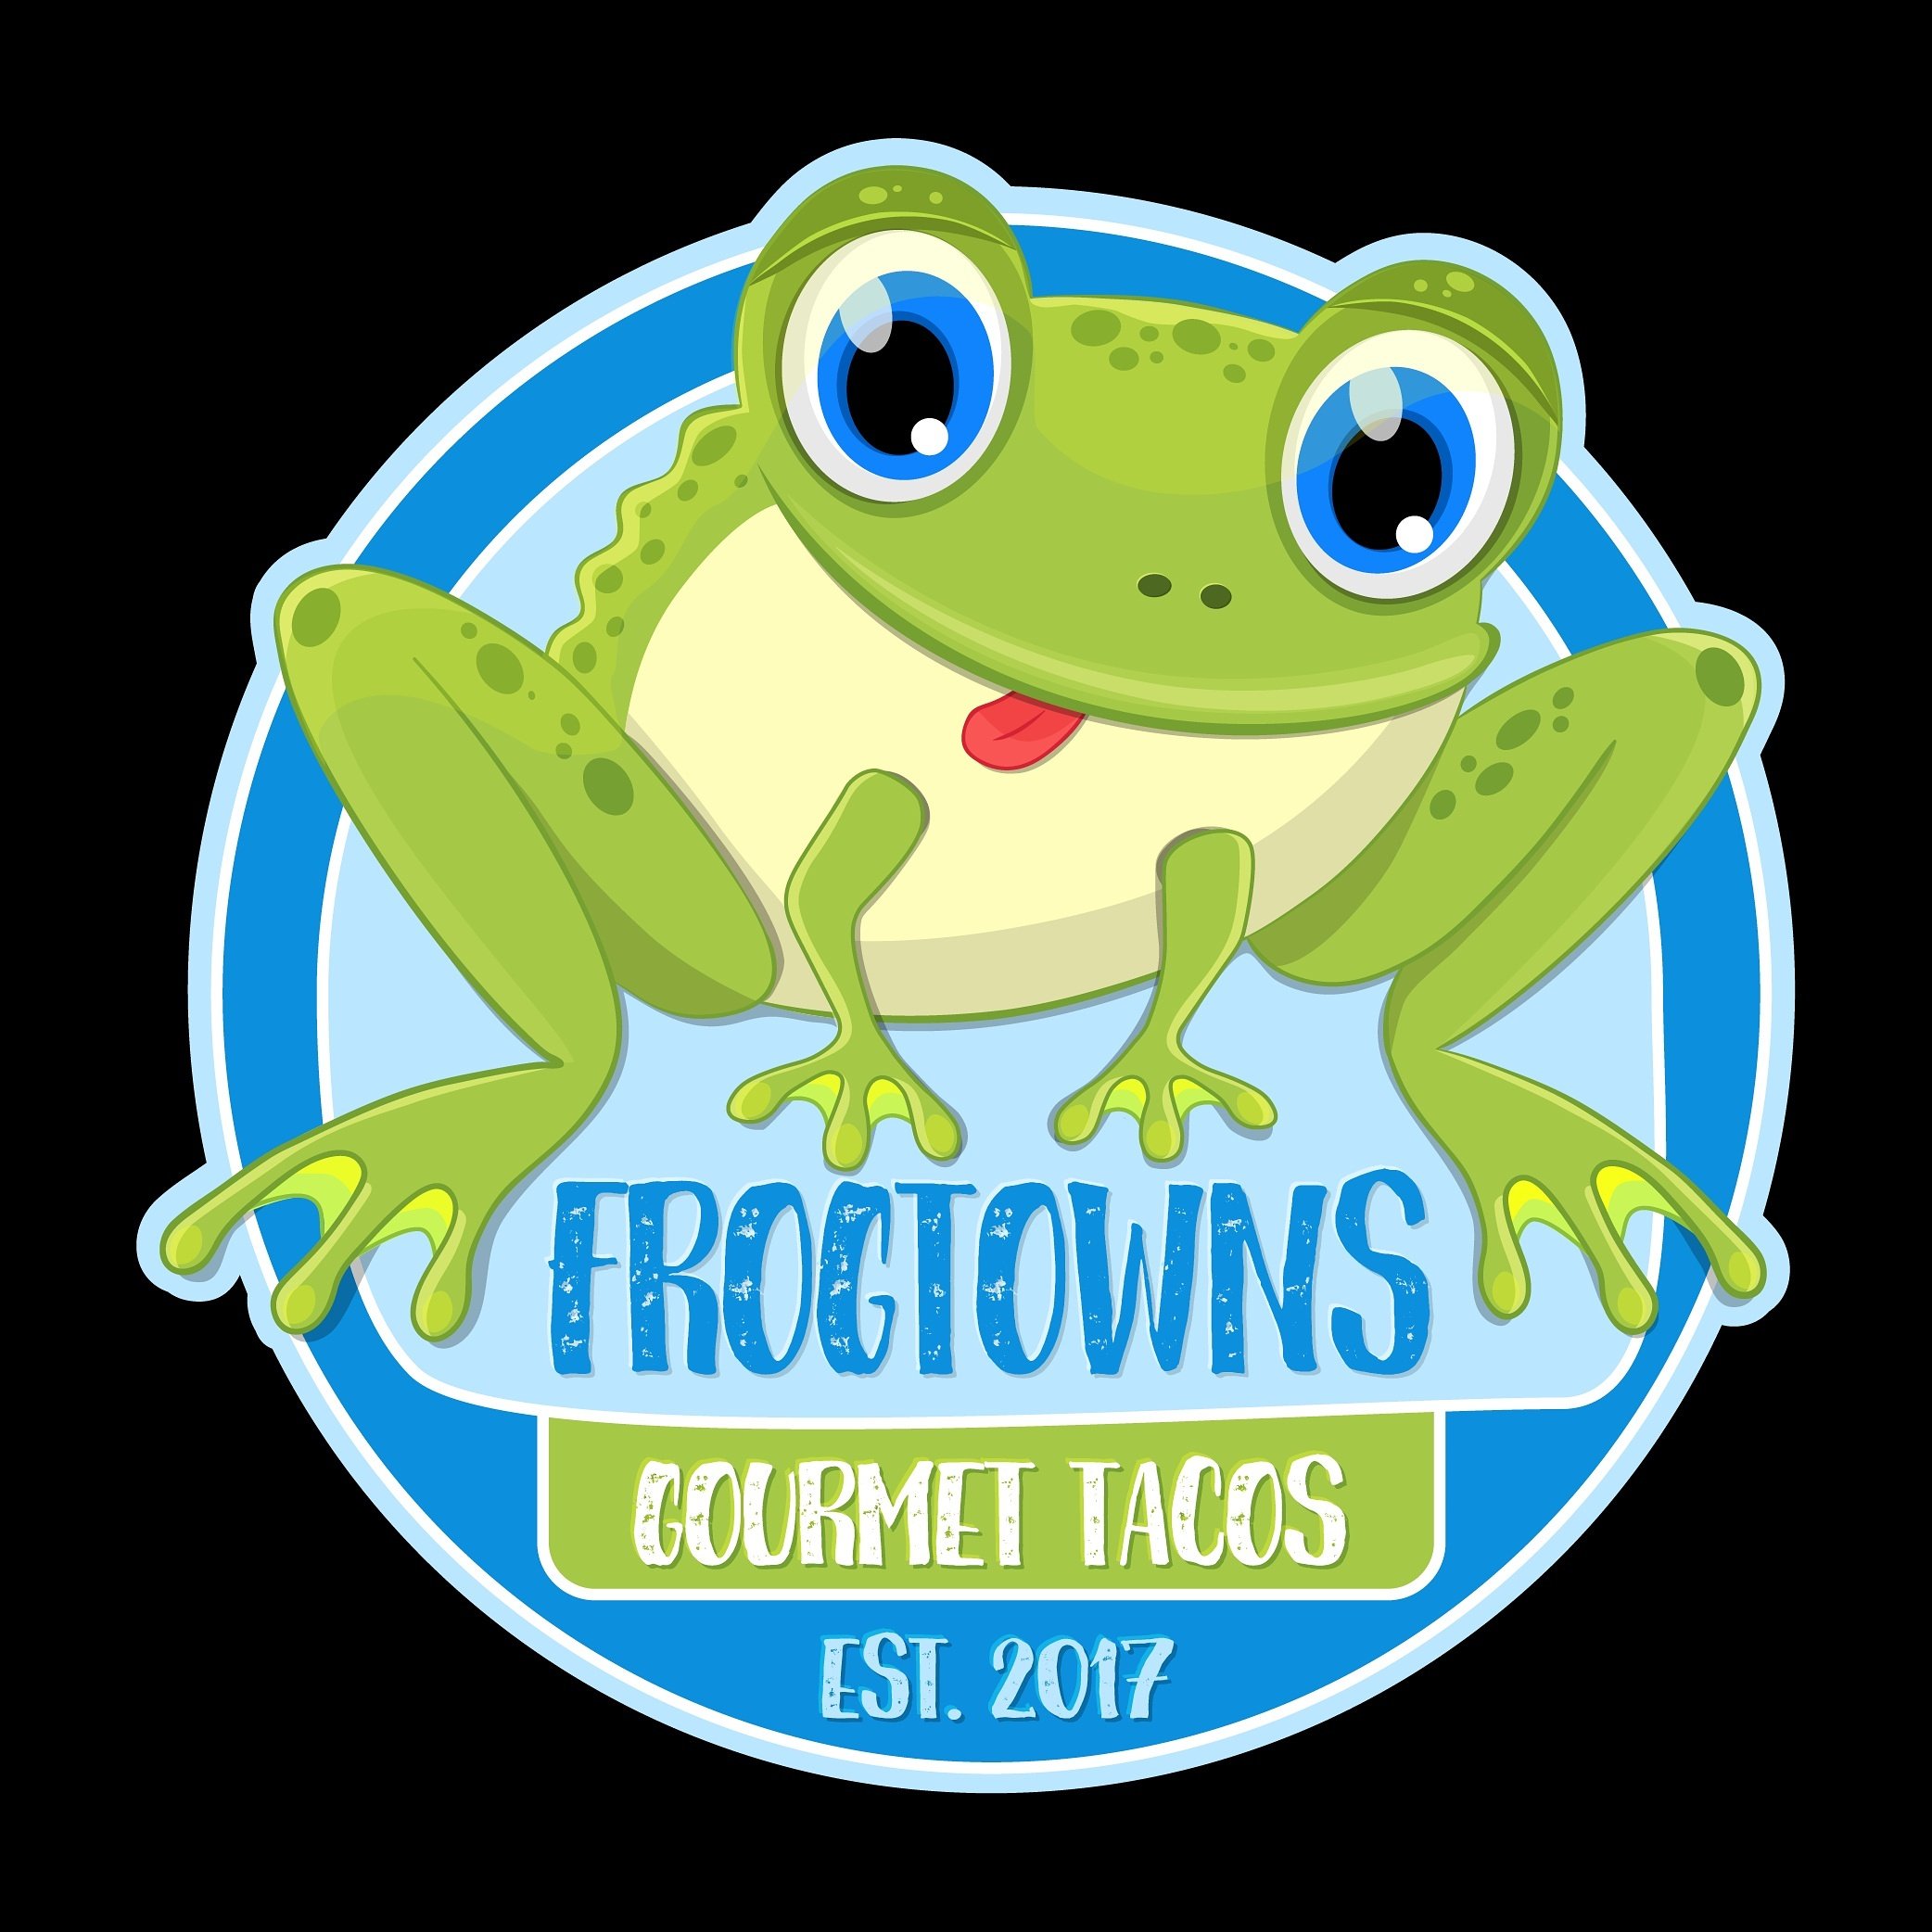 We are Frogtown's Gourmet Tacos. We are a small family owned catering business. Stop on by and try us or book us for your next event.